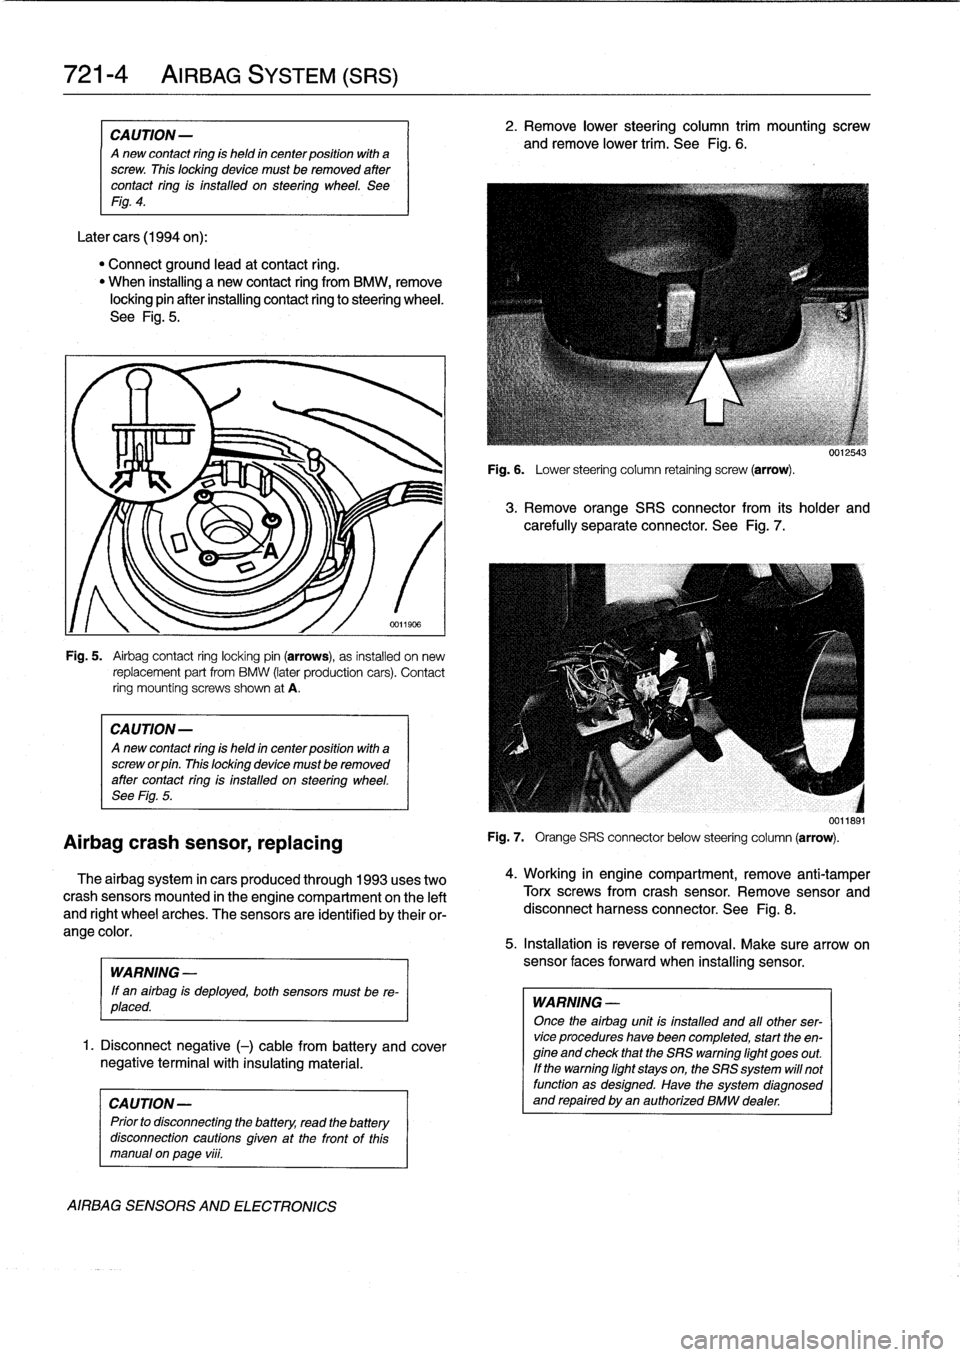 BMW 318i 1997 E36 Repair Manual 
721-
4

	

AIRBAG
SYSTEM
(SRS)

CAUTION-

A
new
contact
ring
is
held
in
center
position
with
a
screw
.
This
locking
device
must
be
removed
after
contact
ring
is
installed
on
steering
wheel
.
See
Fig
